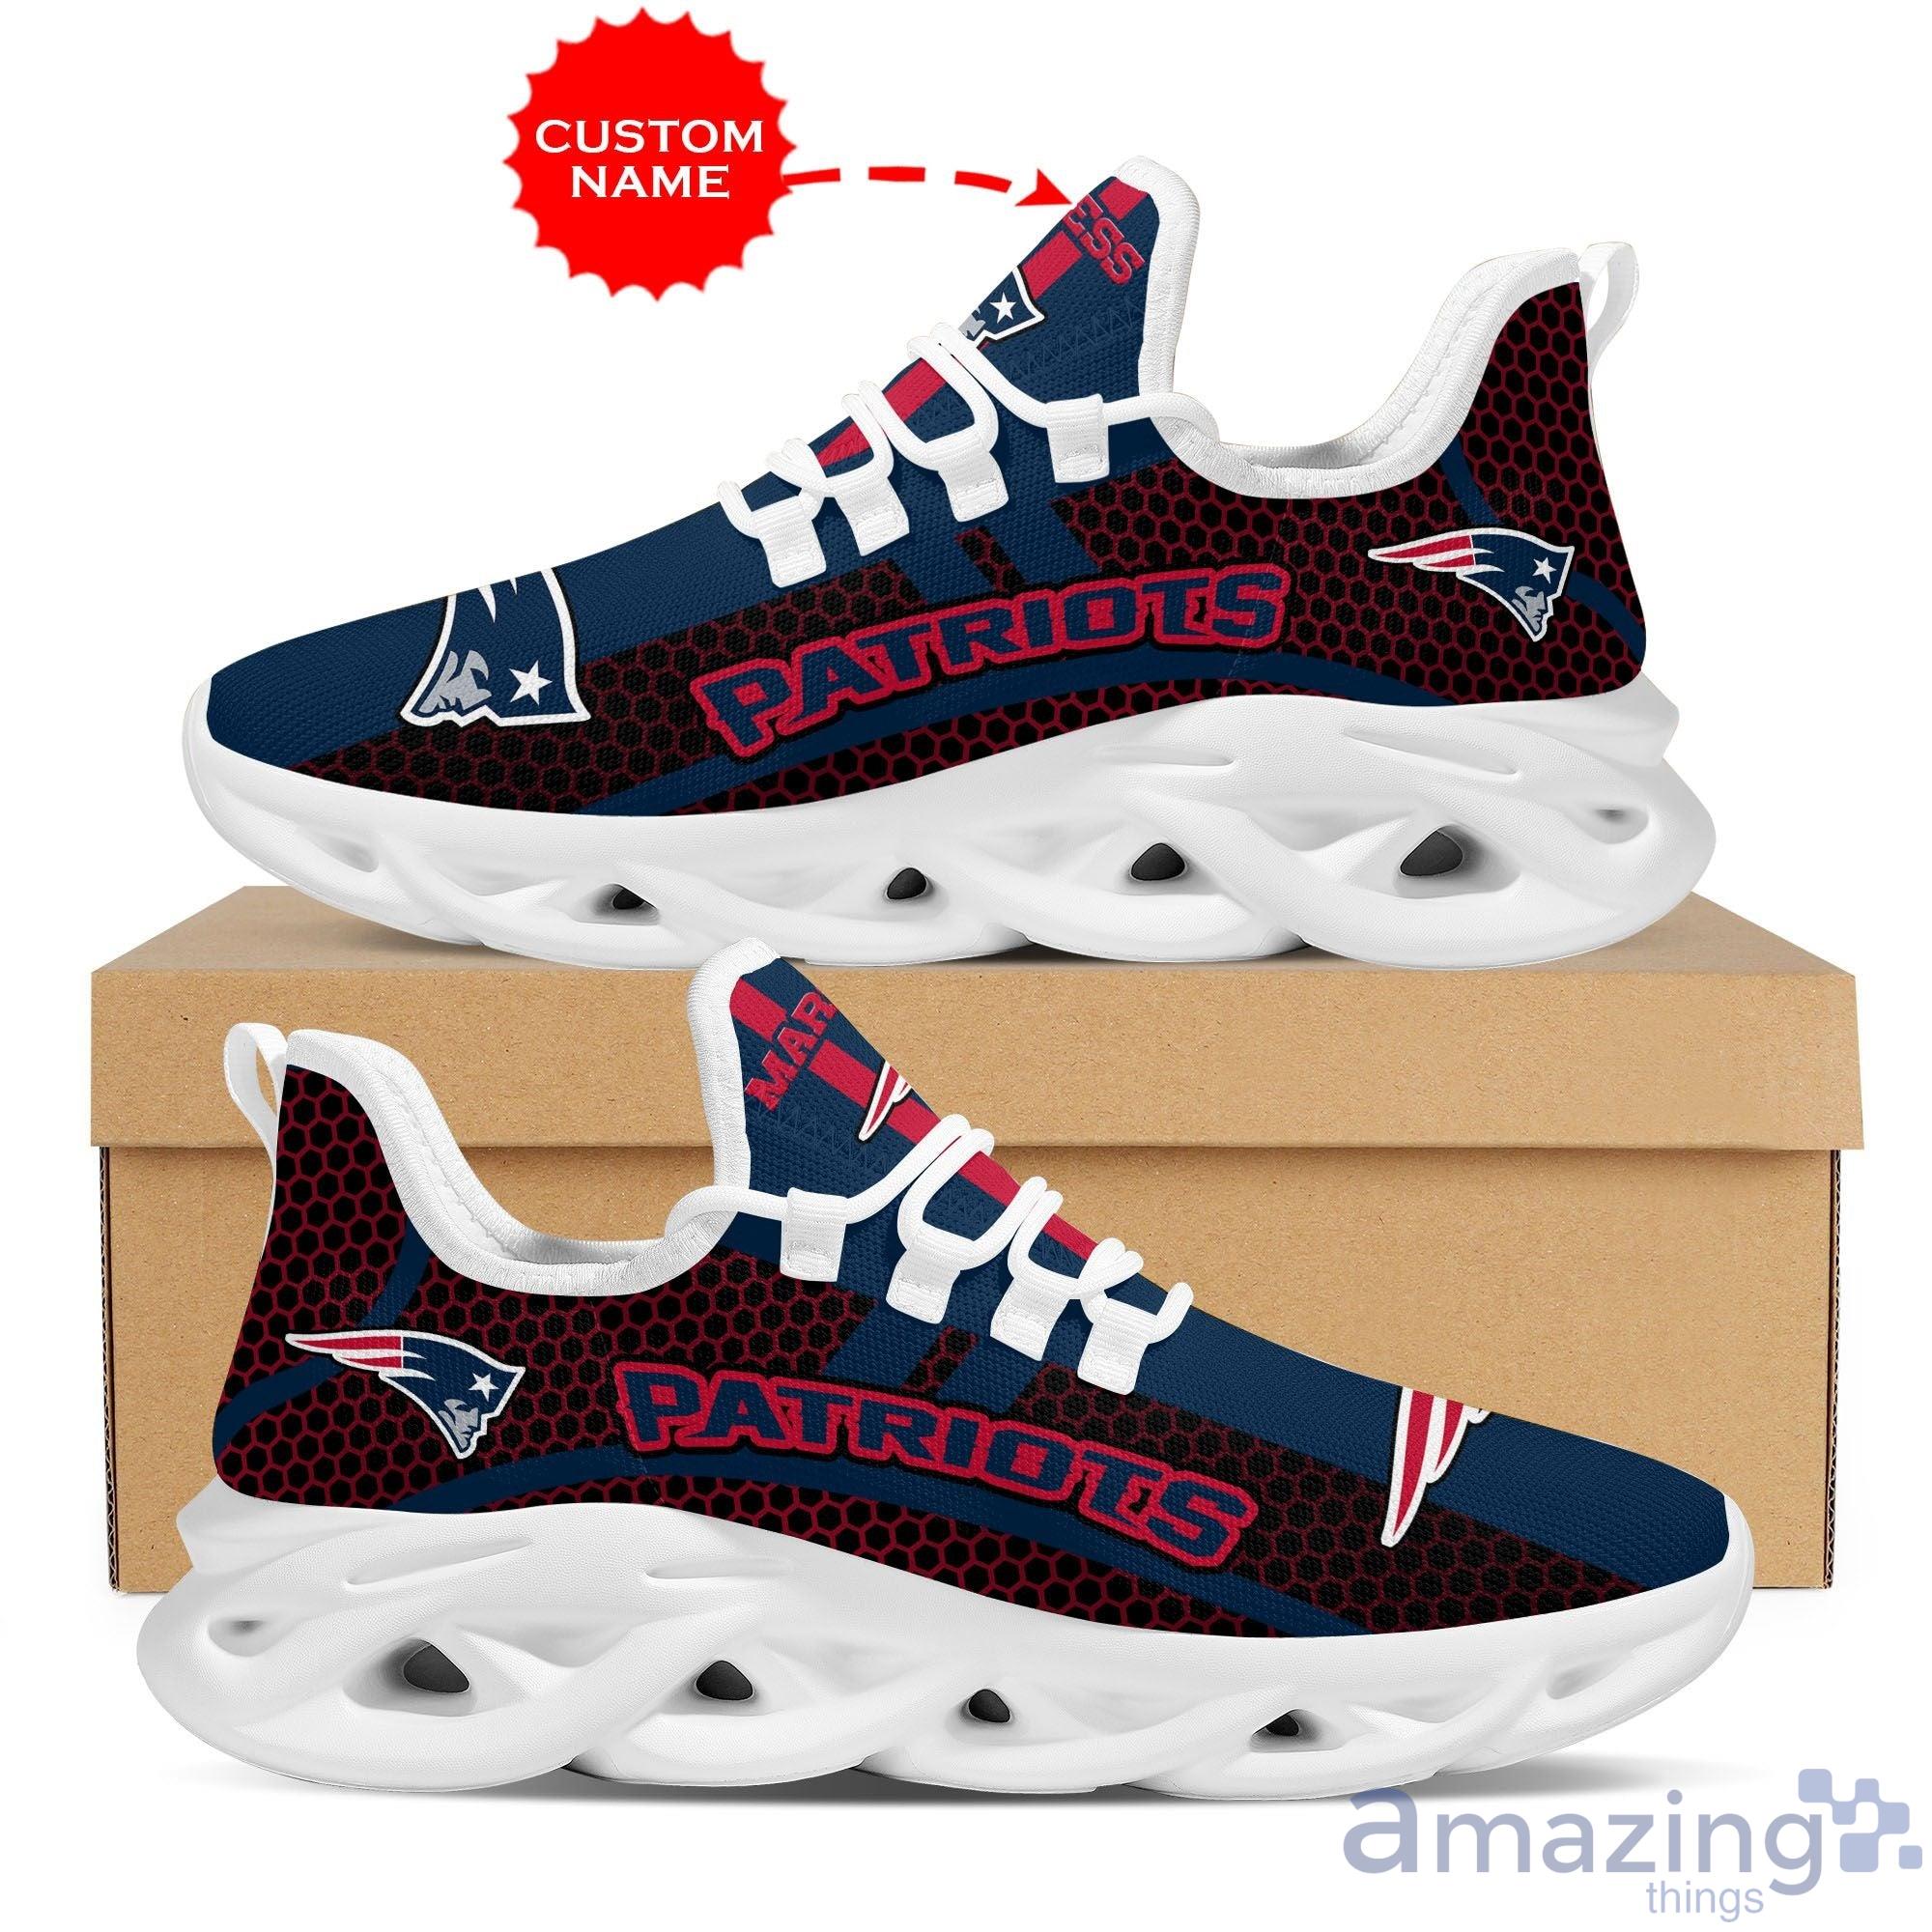 New England Patriots Custom Name Max Soul Sneaker Running Shoes Product Photo 1